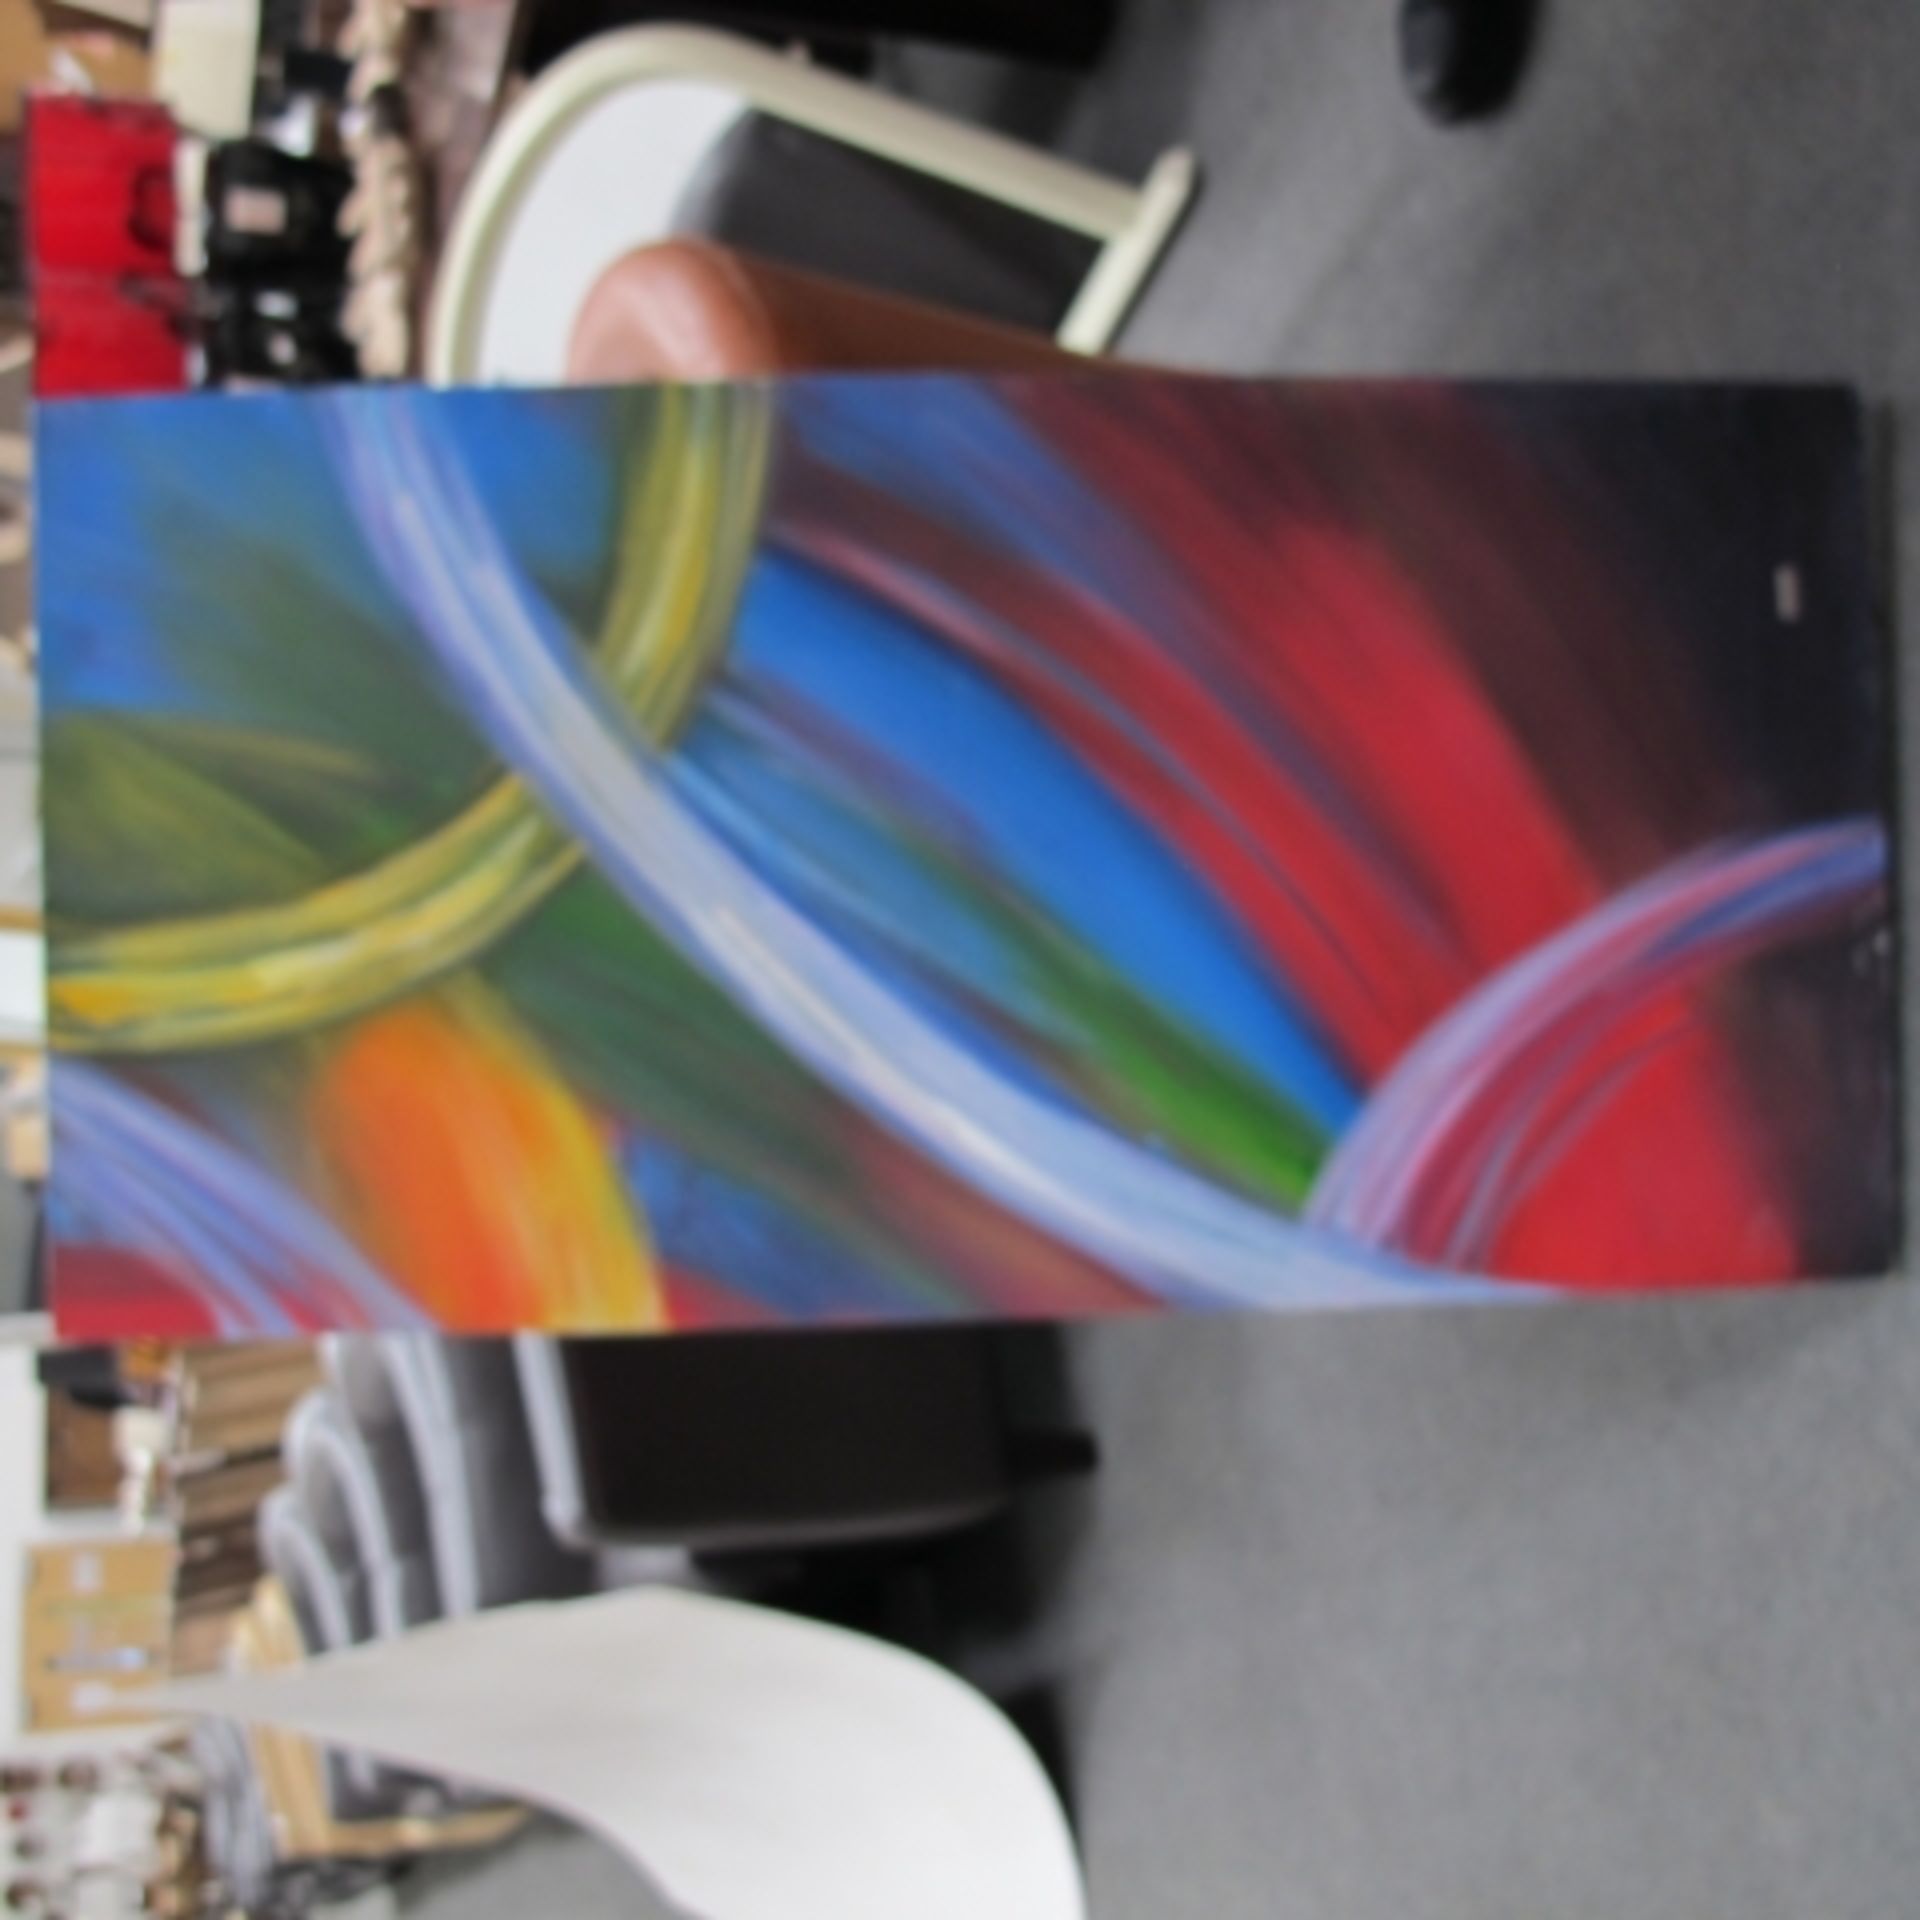 Collection of five unframed abstract oil paintings by Rachel Jack Ltd Artists (est. £20-£40) - Image 4 of 6